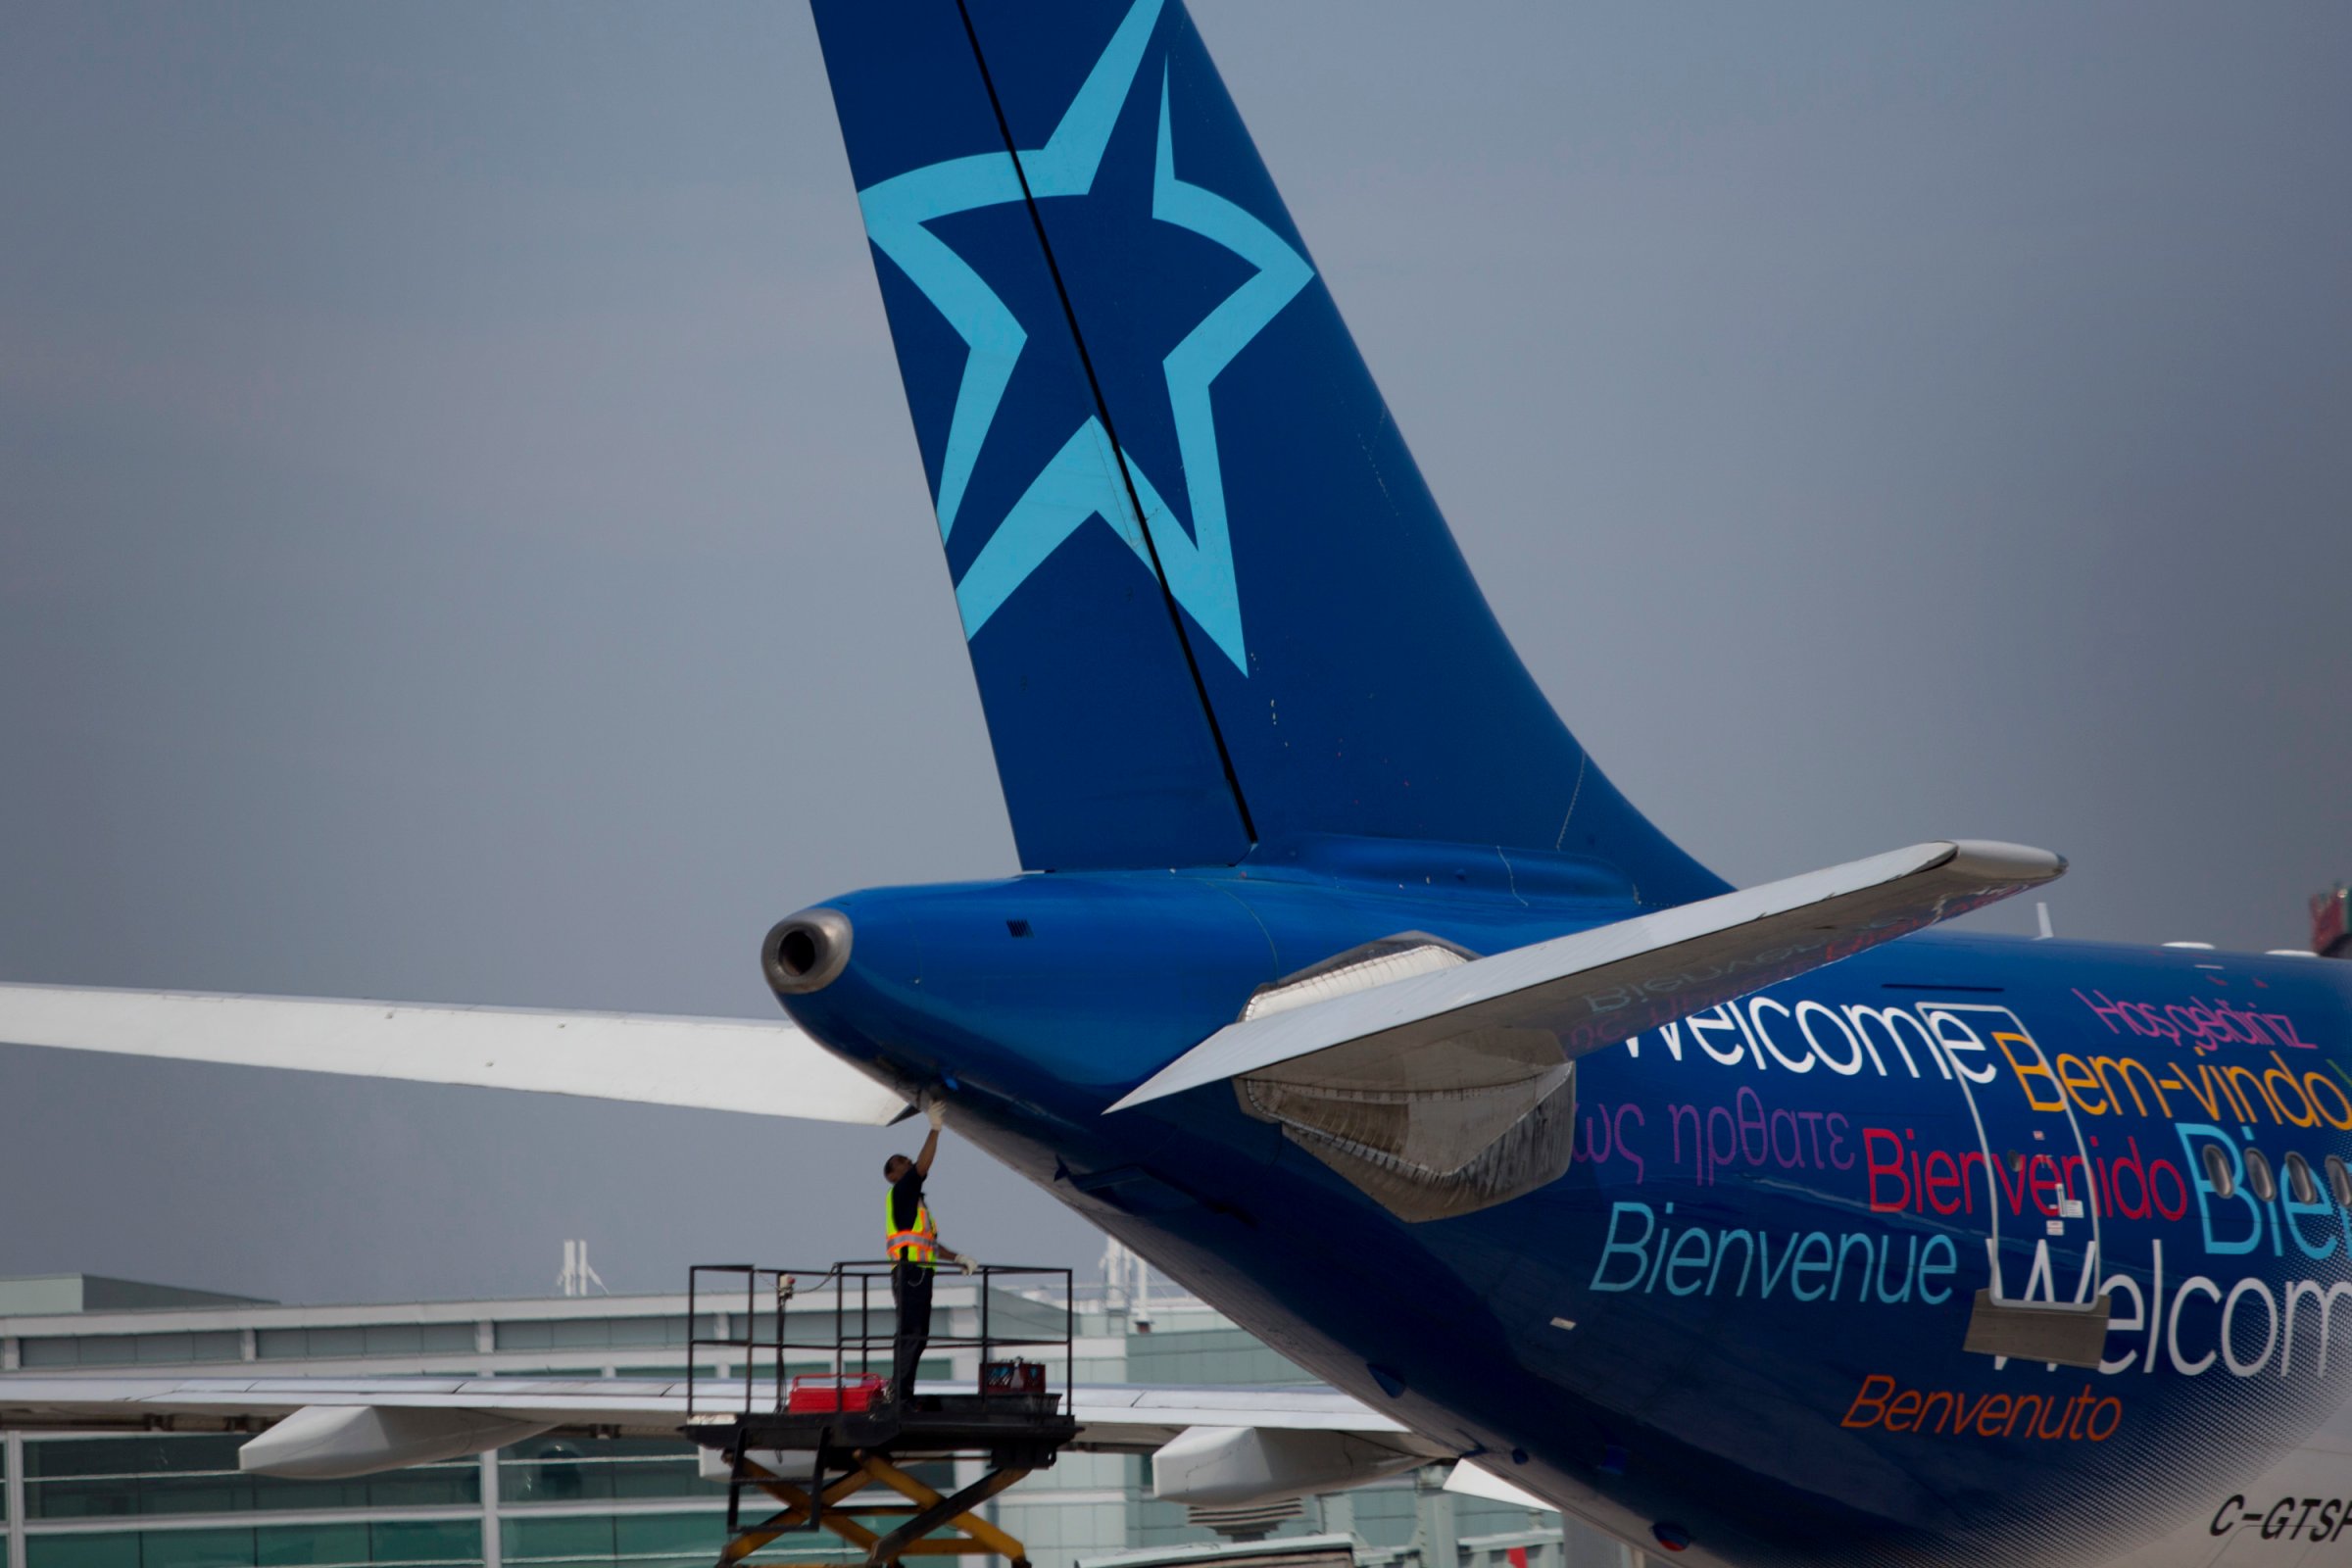 A worker inspects the rear of an Air Transat aircraft at Toronto Pearson International Airport in Toronto, Ontario, Canada, on July 3, 2013.